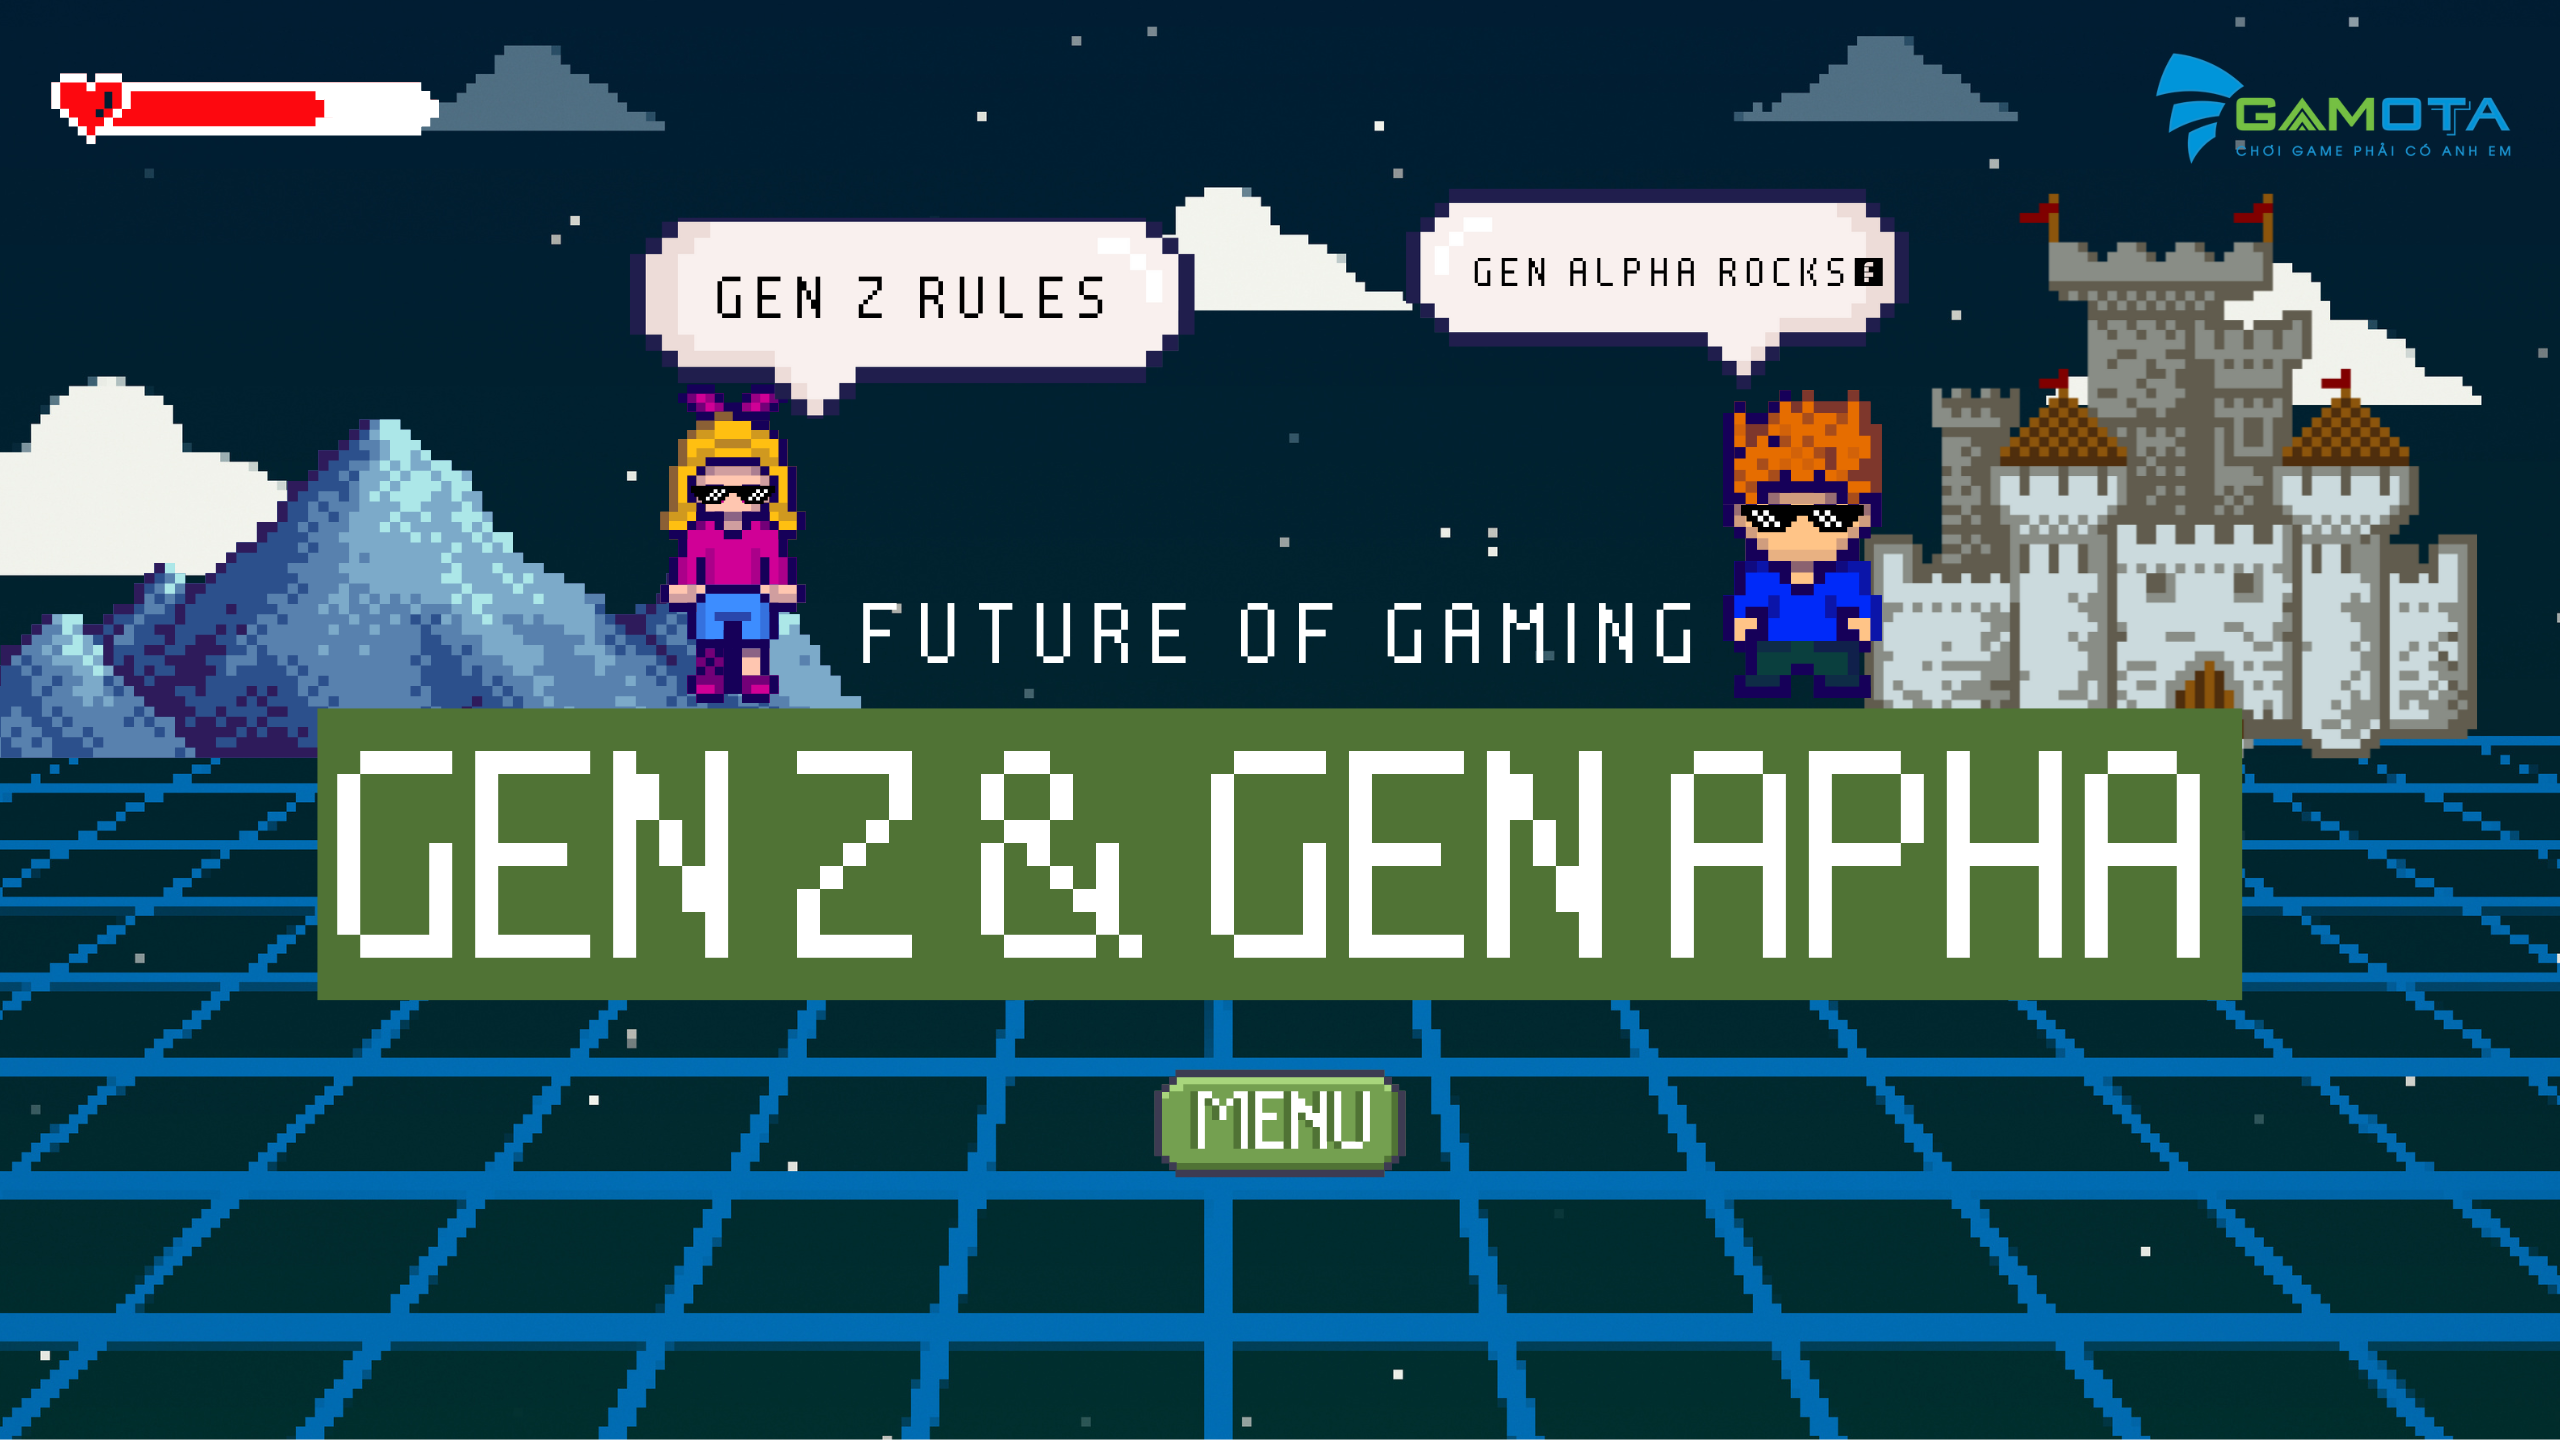 May Gen Z & Gen Alpha be the future of gaming?